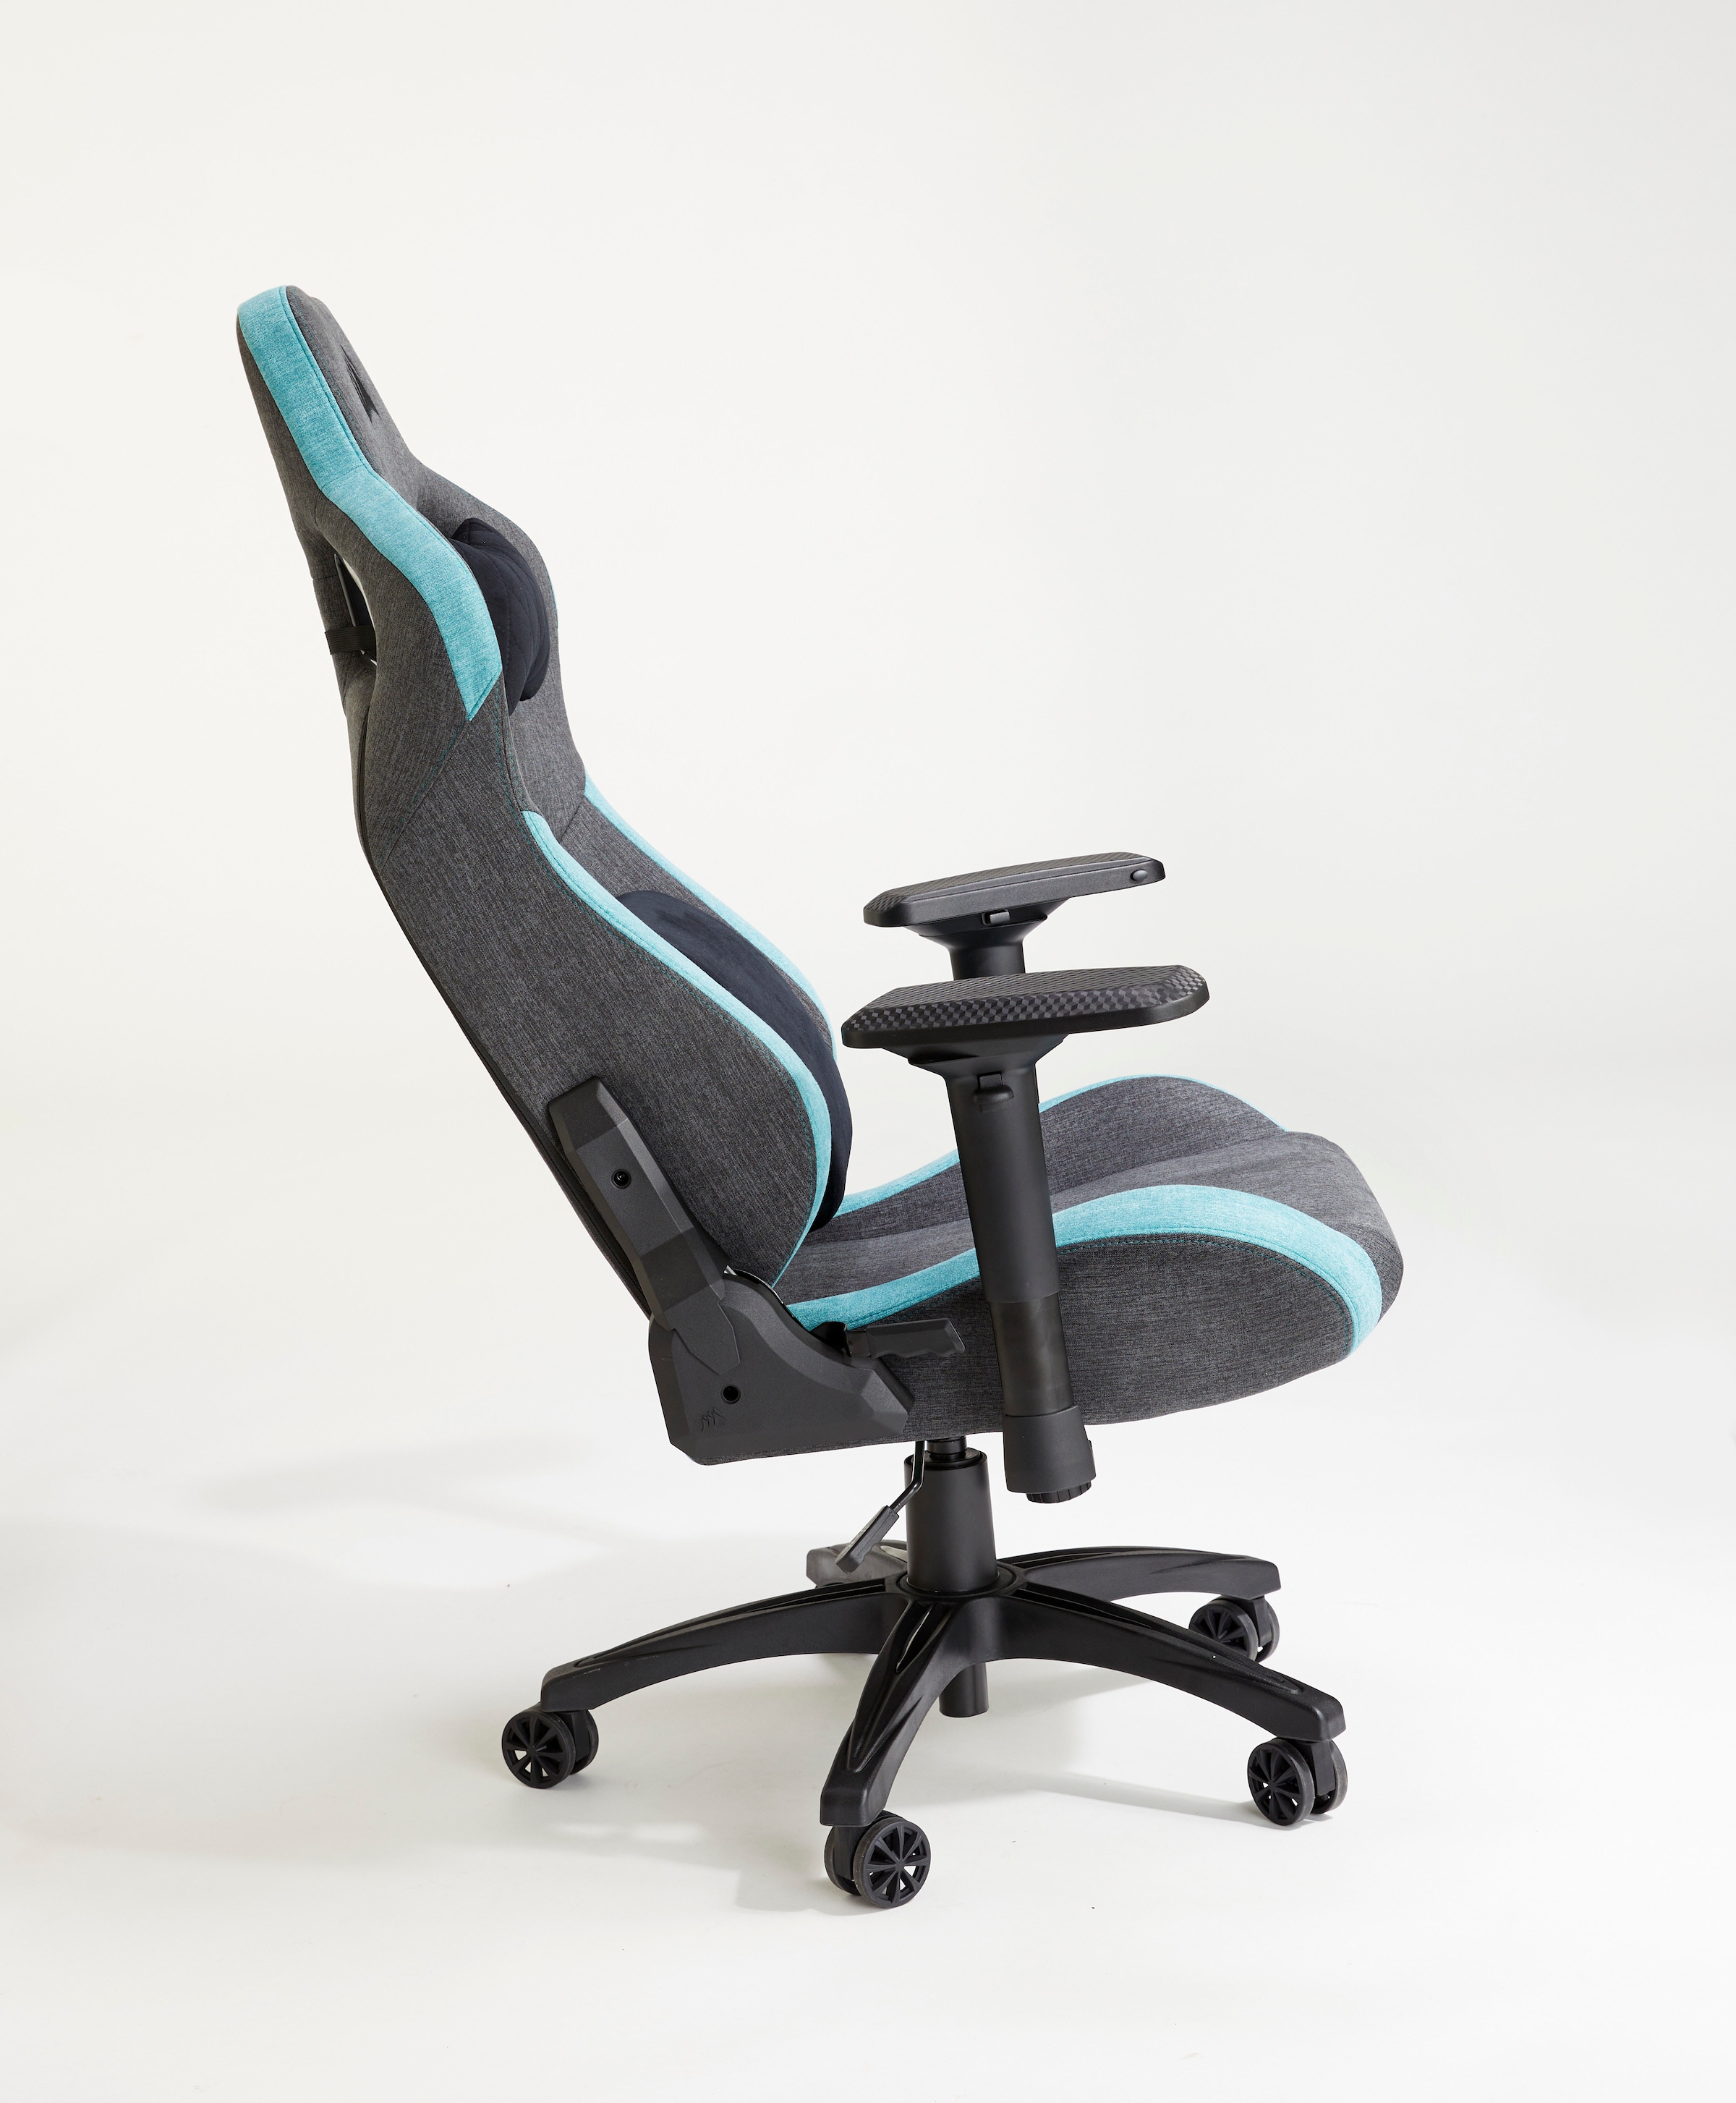 Gaming Soft Corsair online Exterior Design, Fabric Fabric Racing-Inspired UNIVERSAL bei Chair »T3 Gaming Chair«, Rush